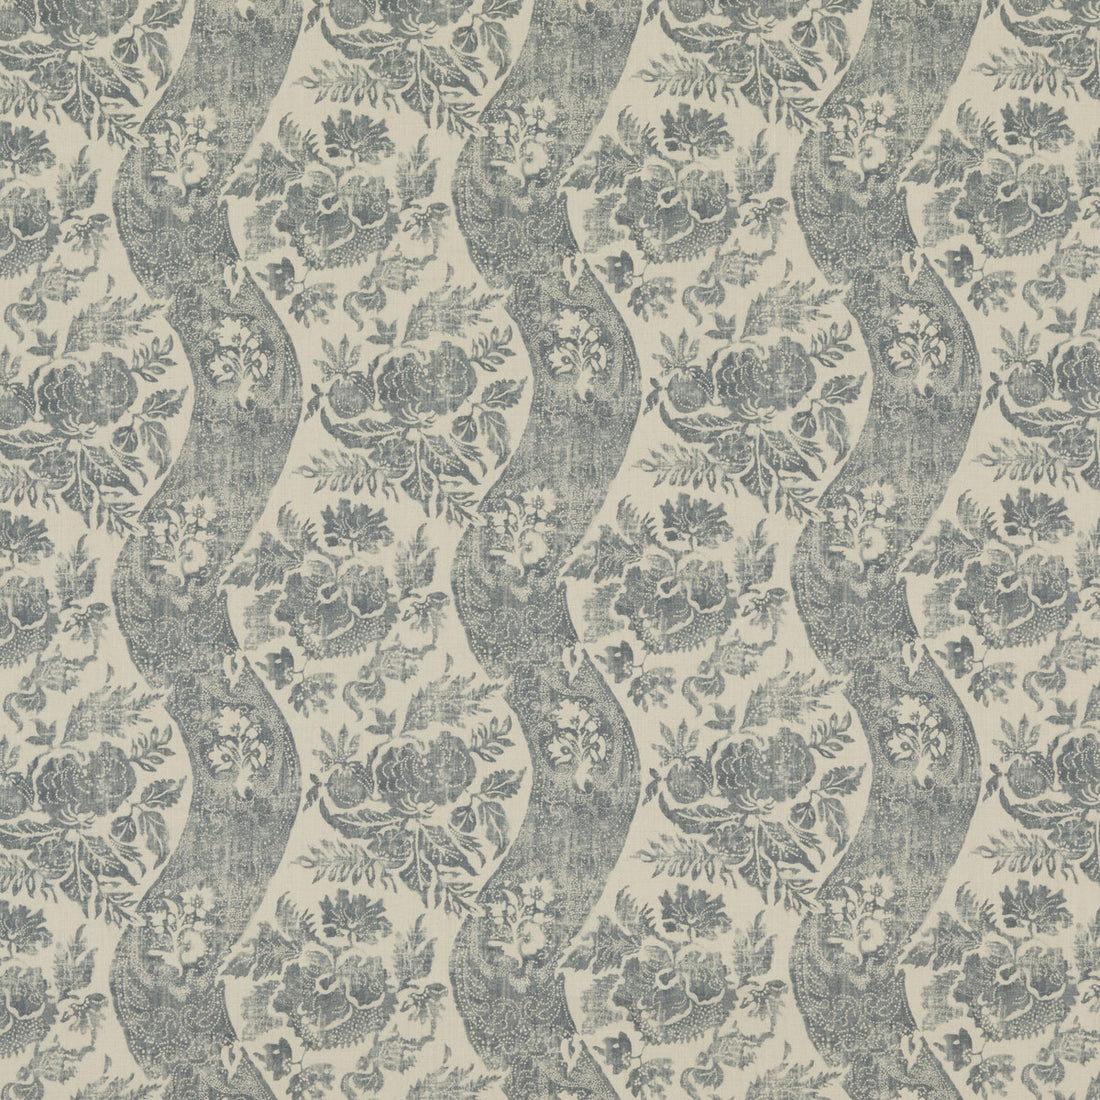 Caldbeck fabric in soft blue color - pattern BP10776.3.0 - by G P &amp; J Baker in the Signature Prints collection